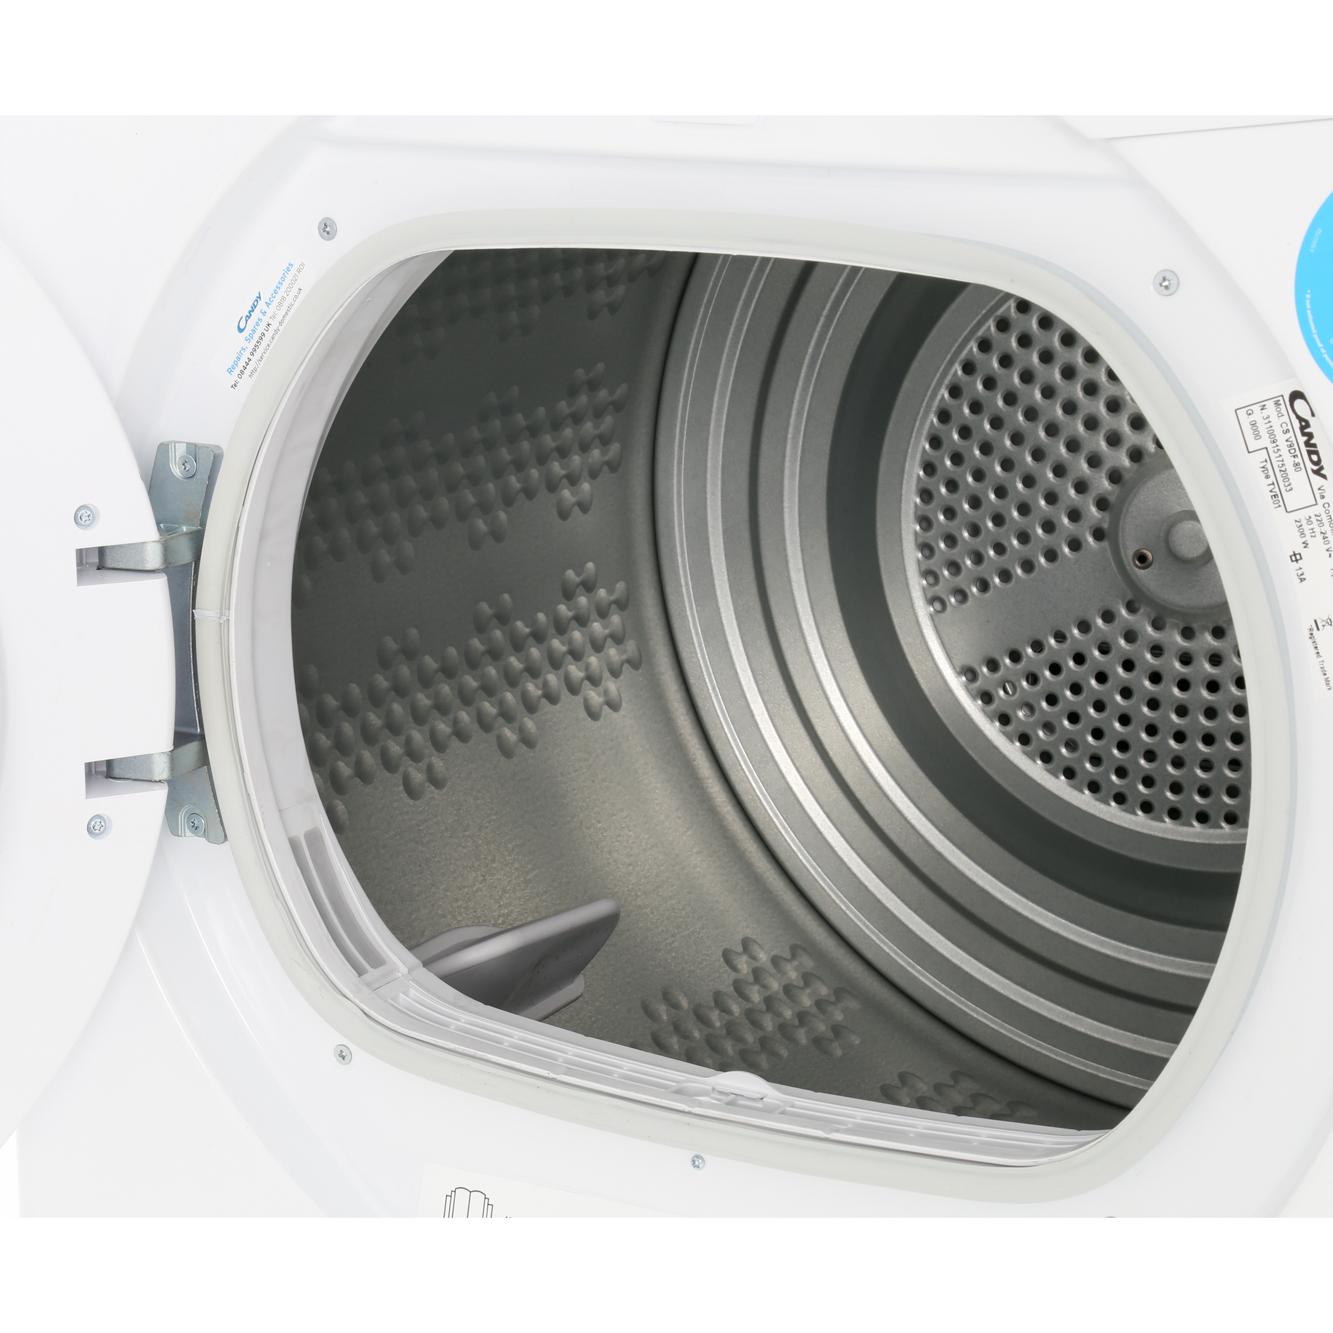 CANDY Vented Dryer 9kg - White CSV9DF - 80